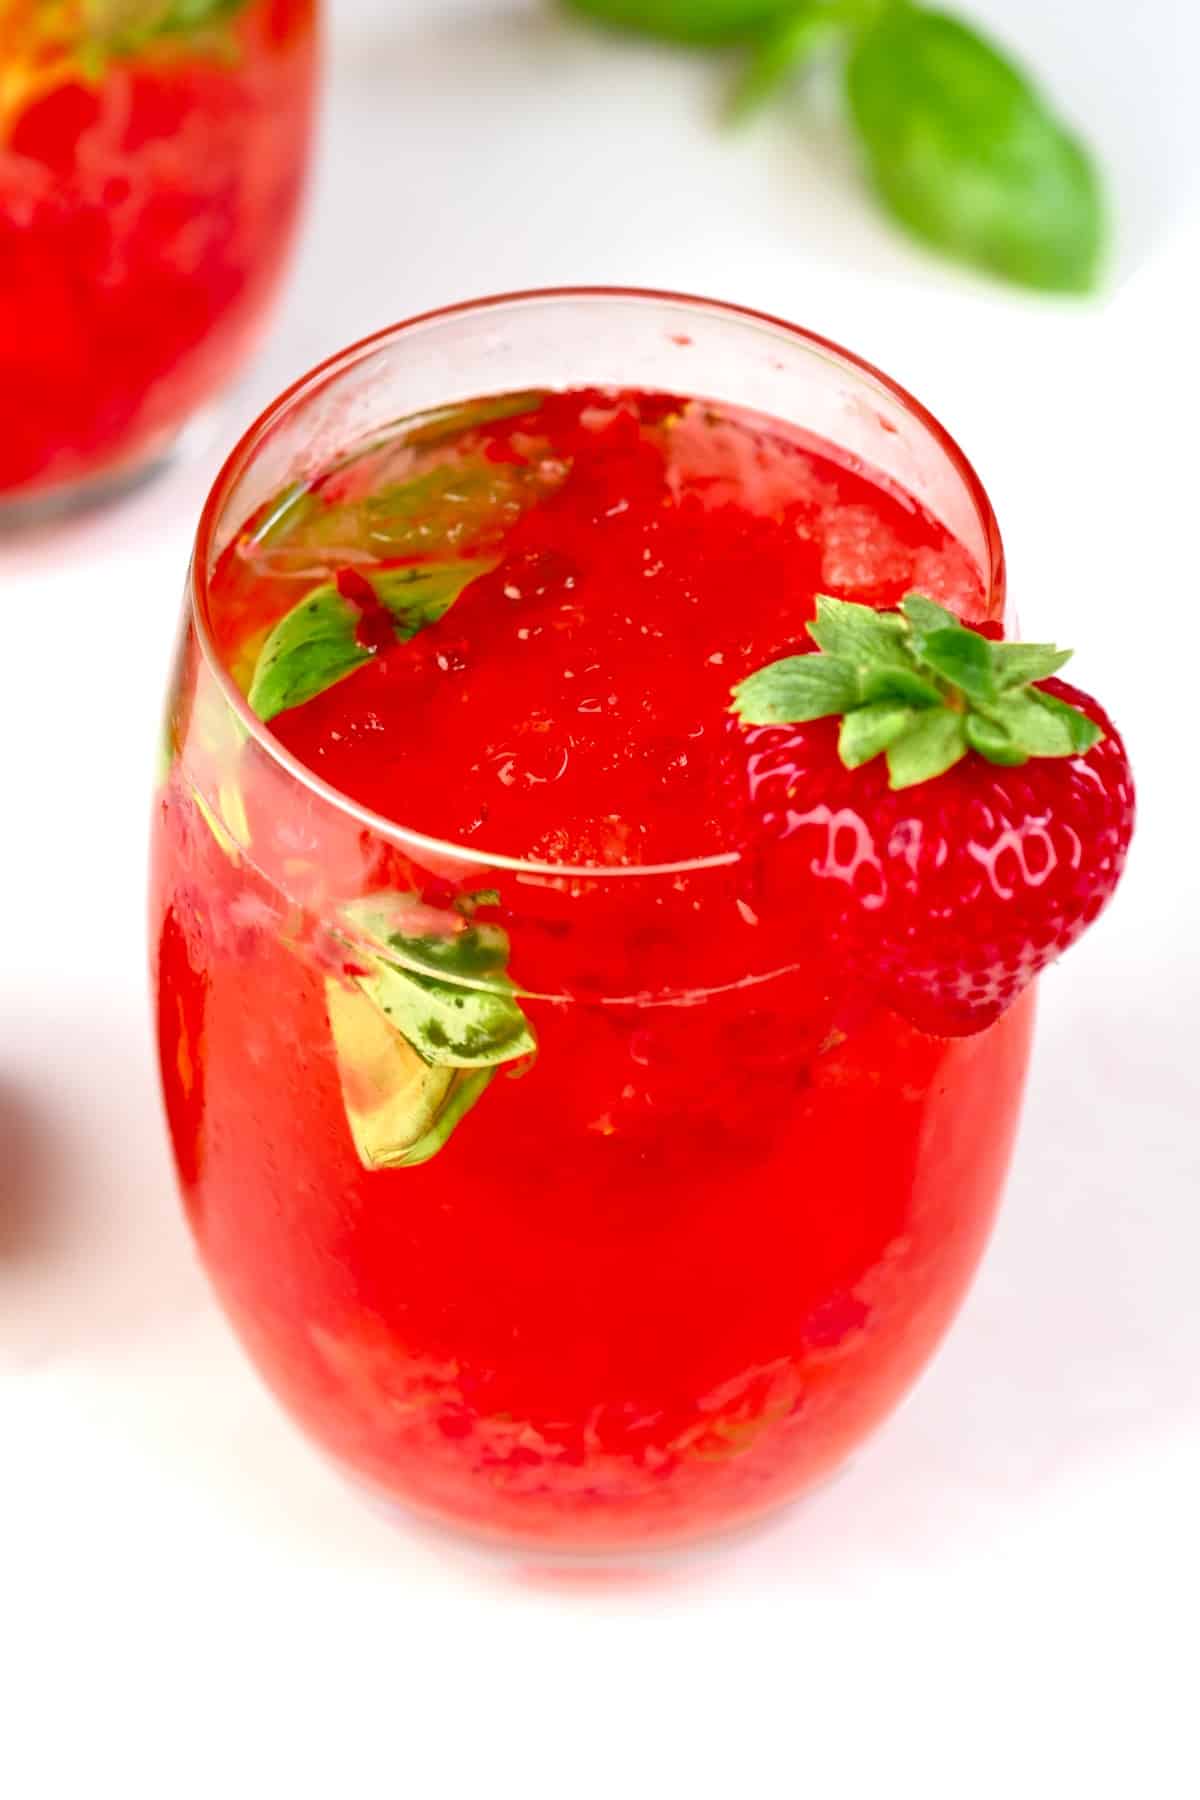 https://www.alphafoodie.com/wp-content/uploads/2020/08/Strawberry-Mocktail-with-strawberries-and-basil.jpeg